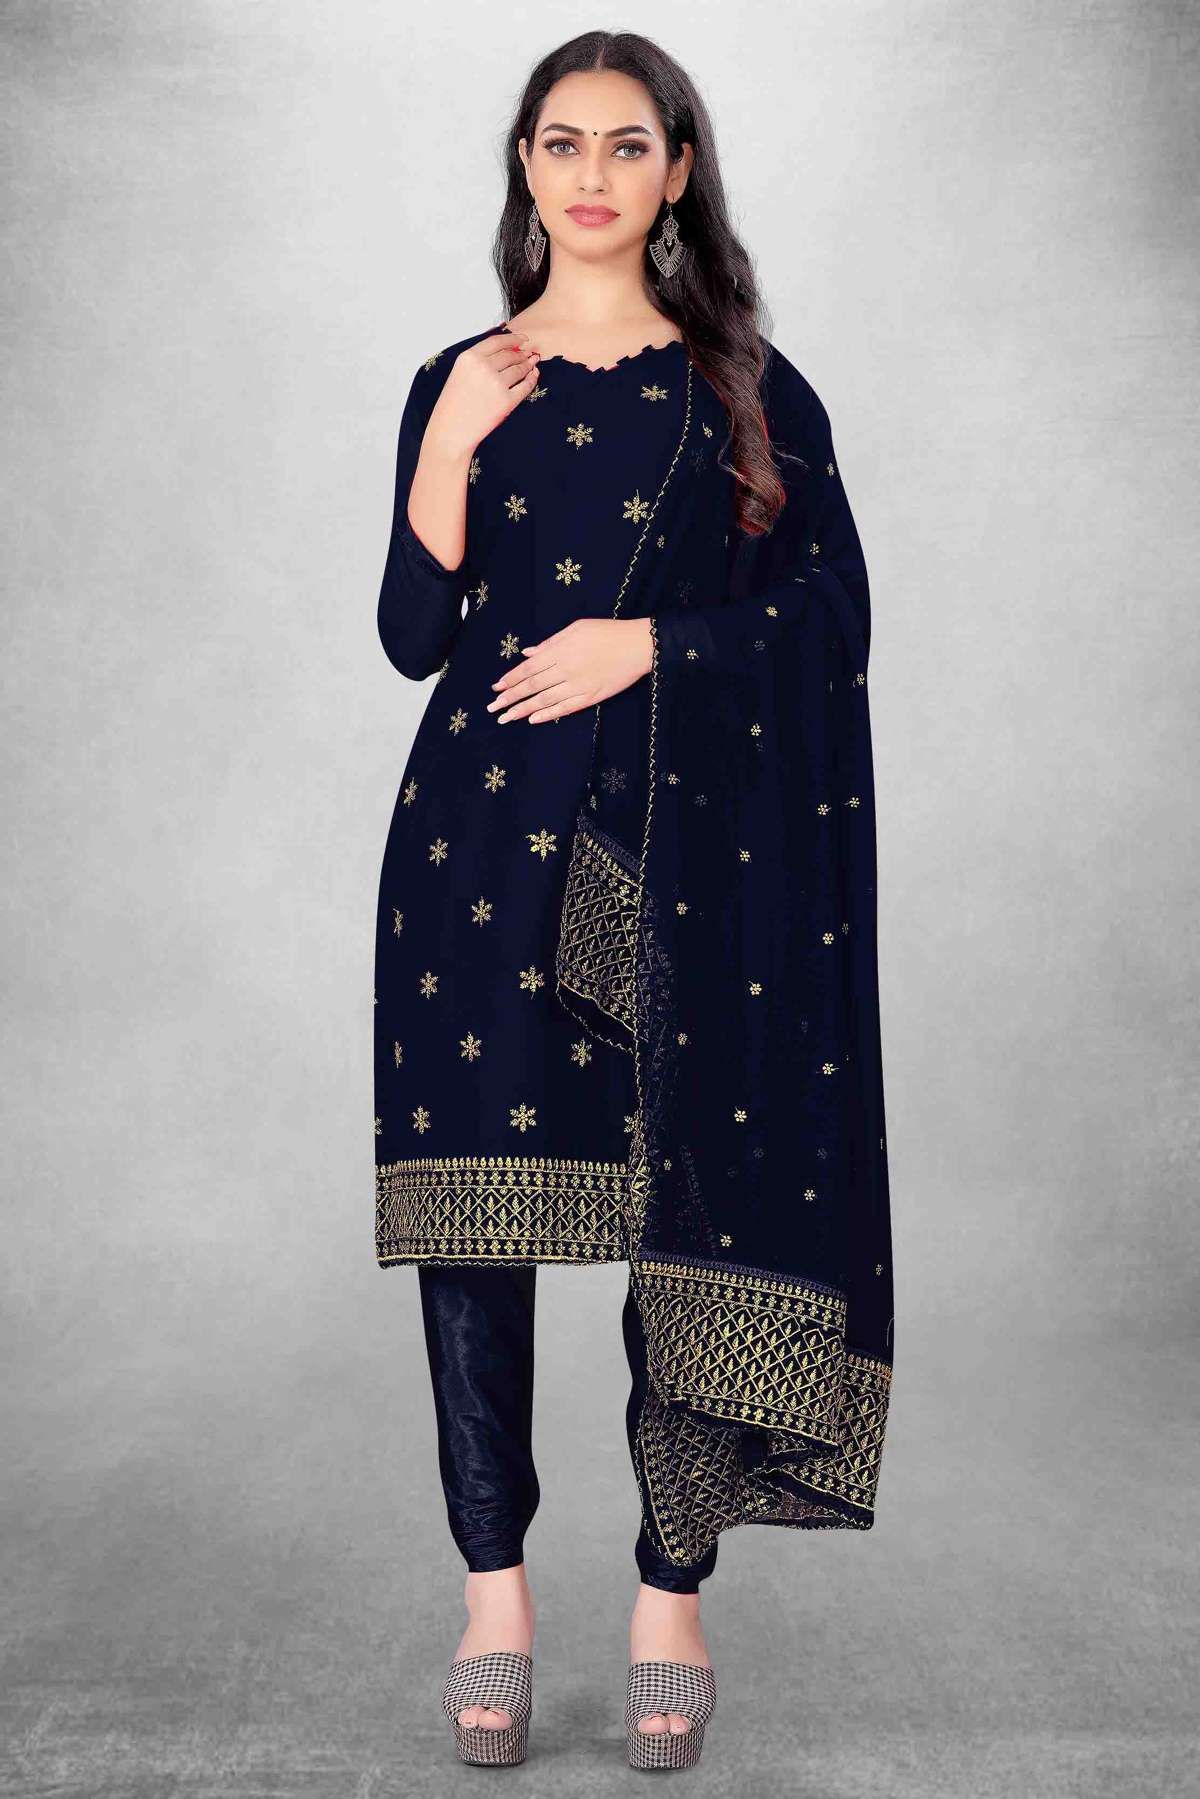 Unstitched Georgette Embroidery Churidar Suit In Navy Blue Colour - US3234500